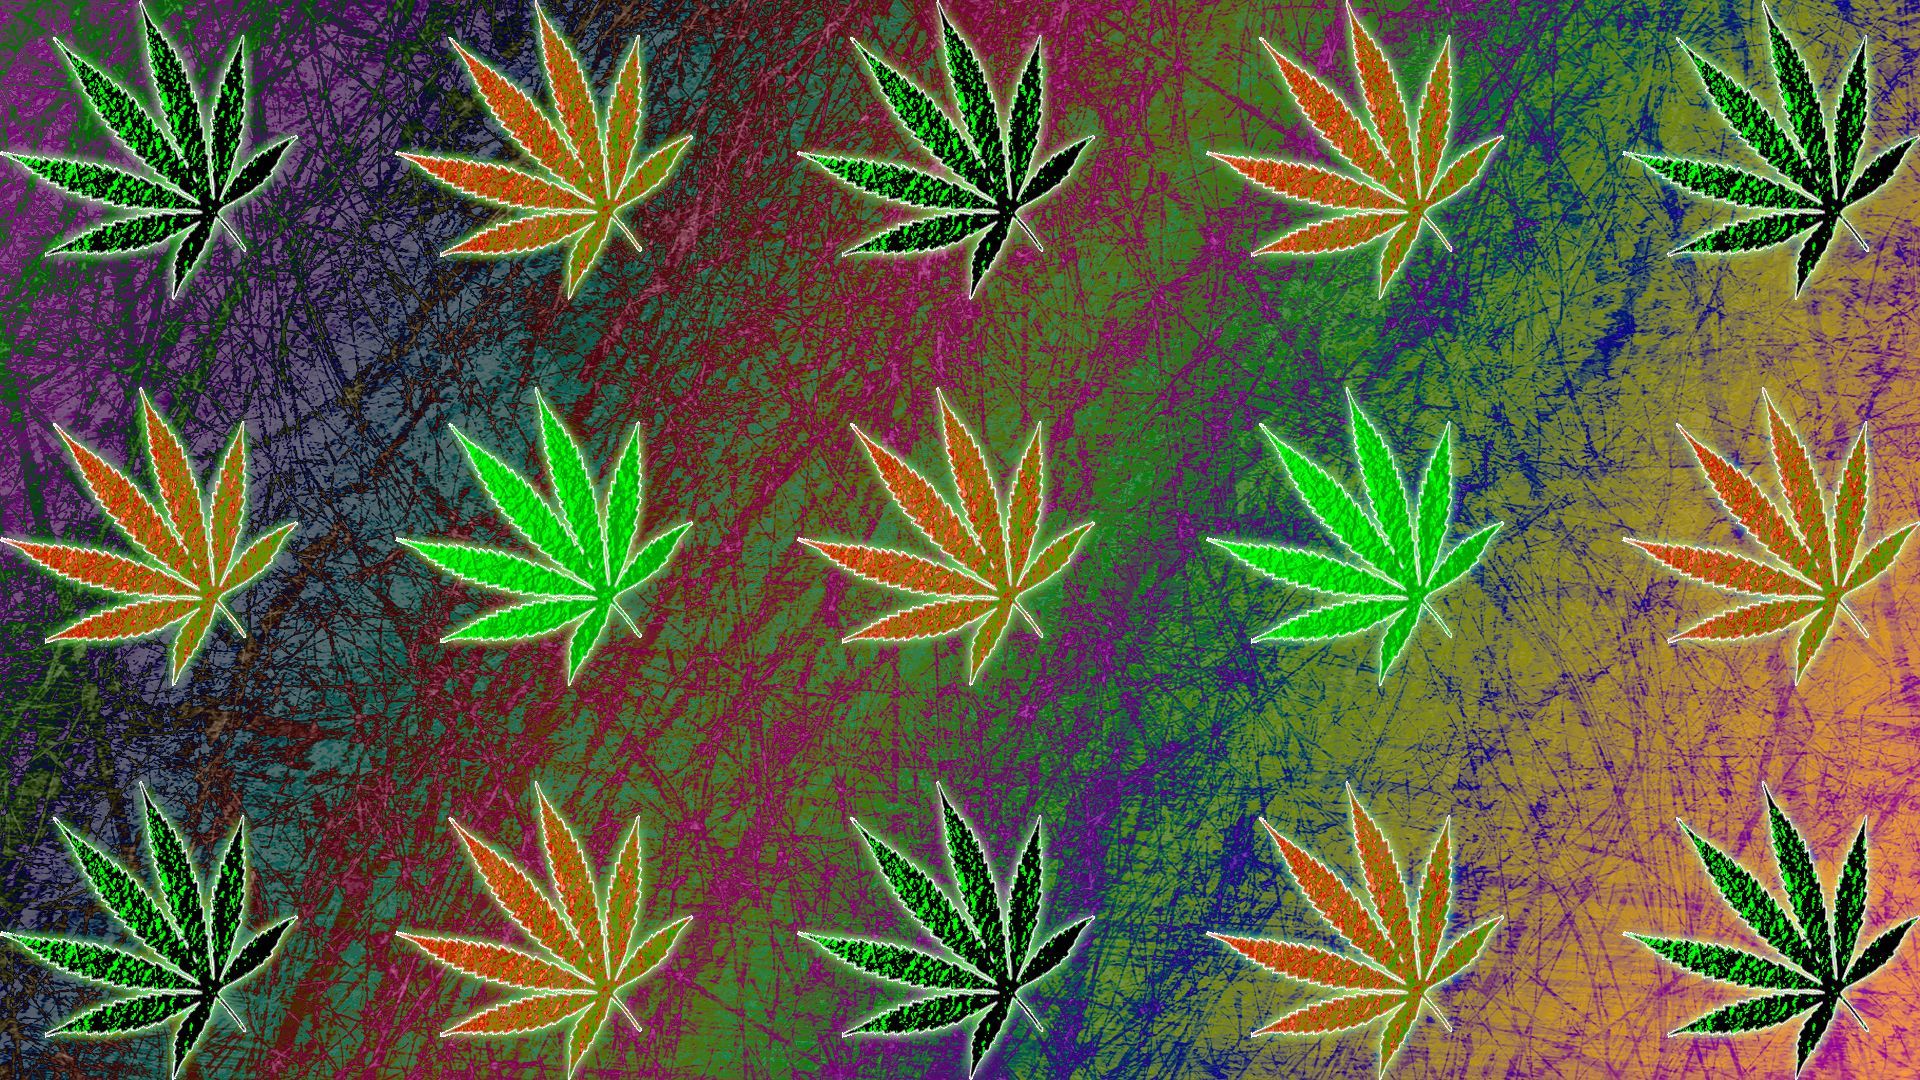 A pattern of green, orange, and purple cannabis leaves on a marbled background. - Weed